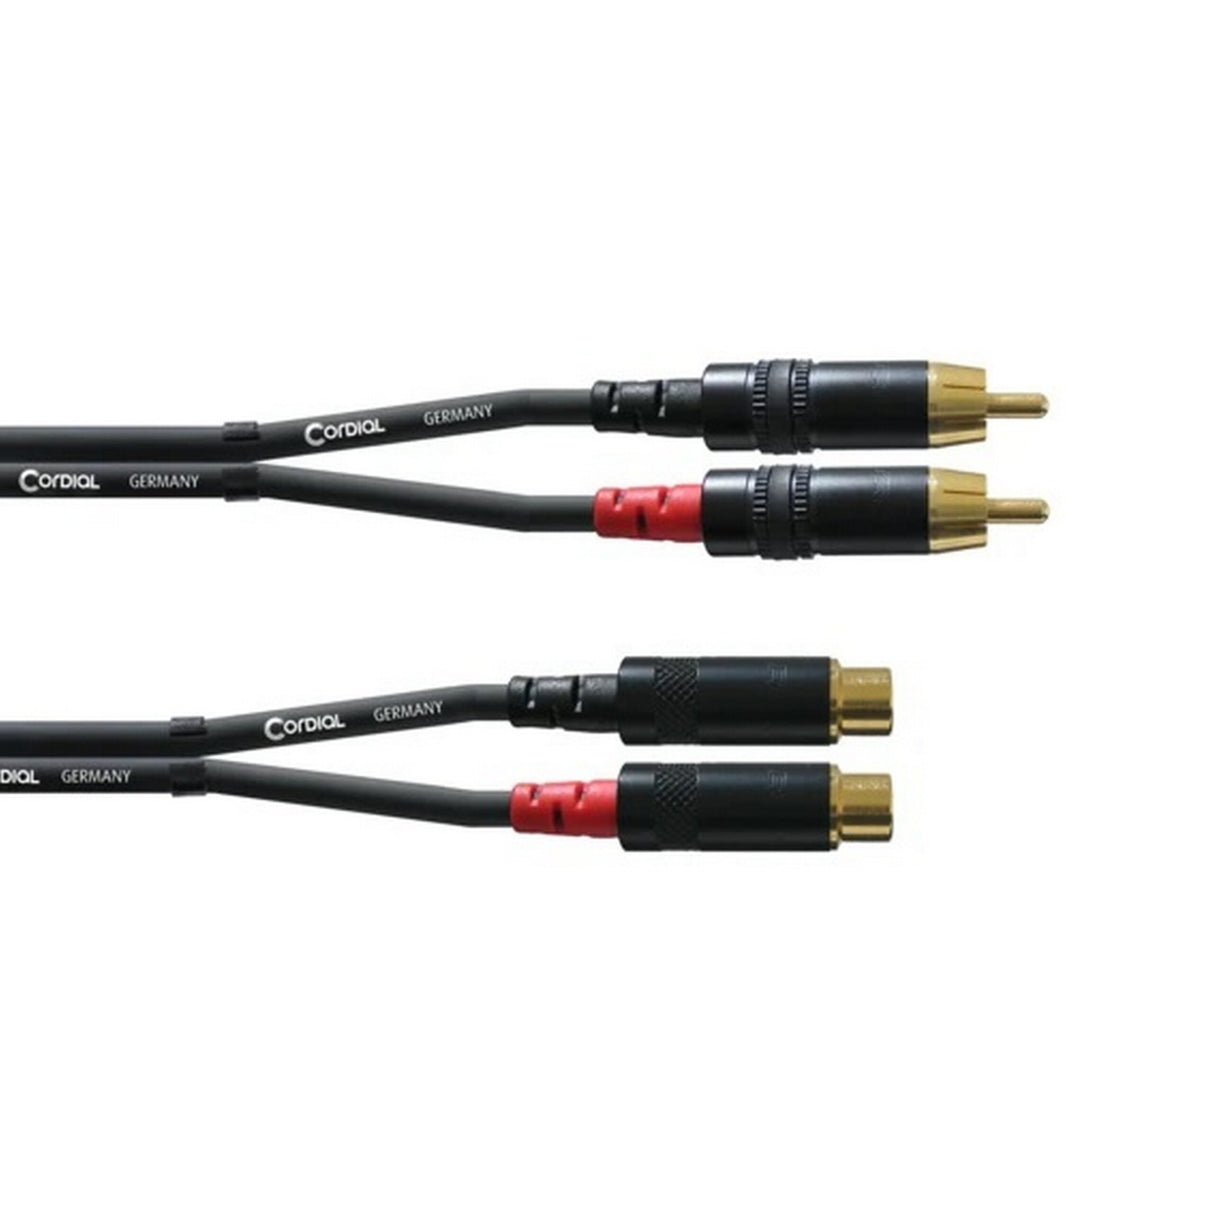 Cordial CFU 3 CE 2 x RCA to 2 x Female RCA Twin Cable/Adapter, Black, 10-Feet